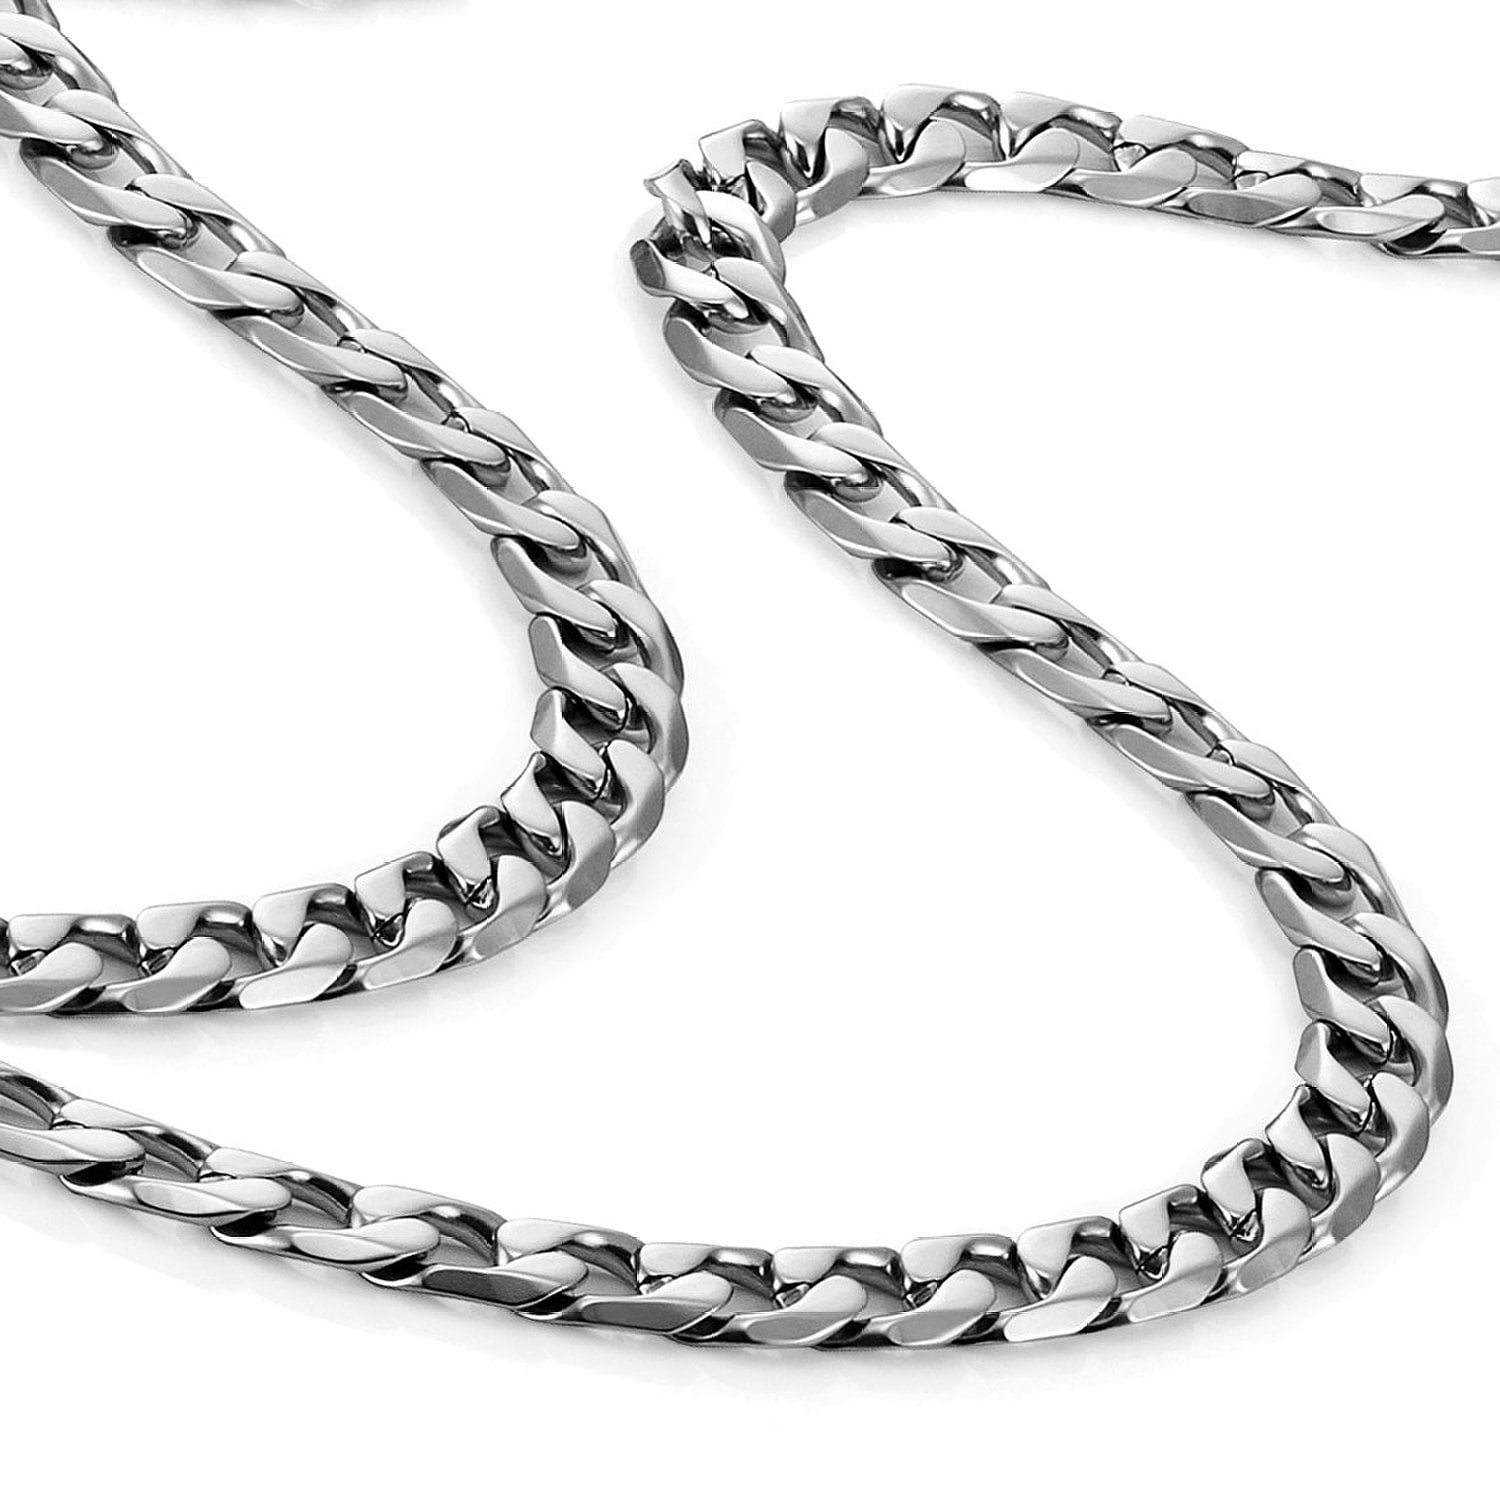 Urban Jewelry - Classic Mens Necklace 316L Stainless Steel Silver Chain Stainless Steel Chain For Men